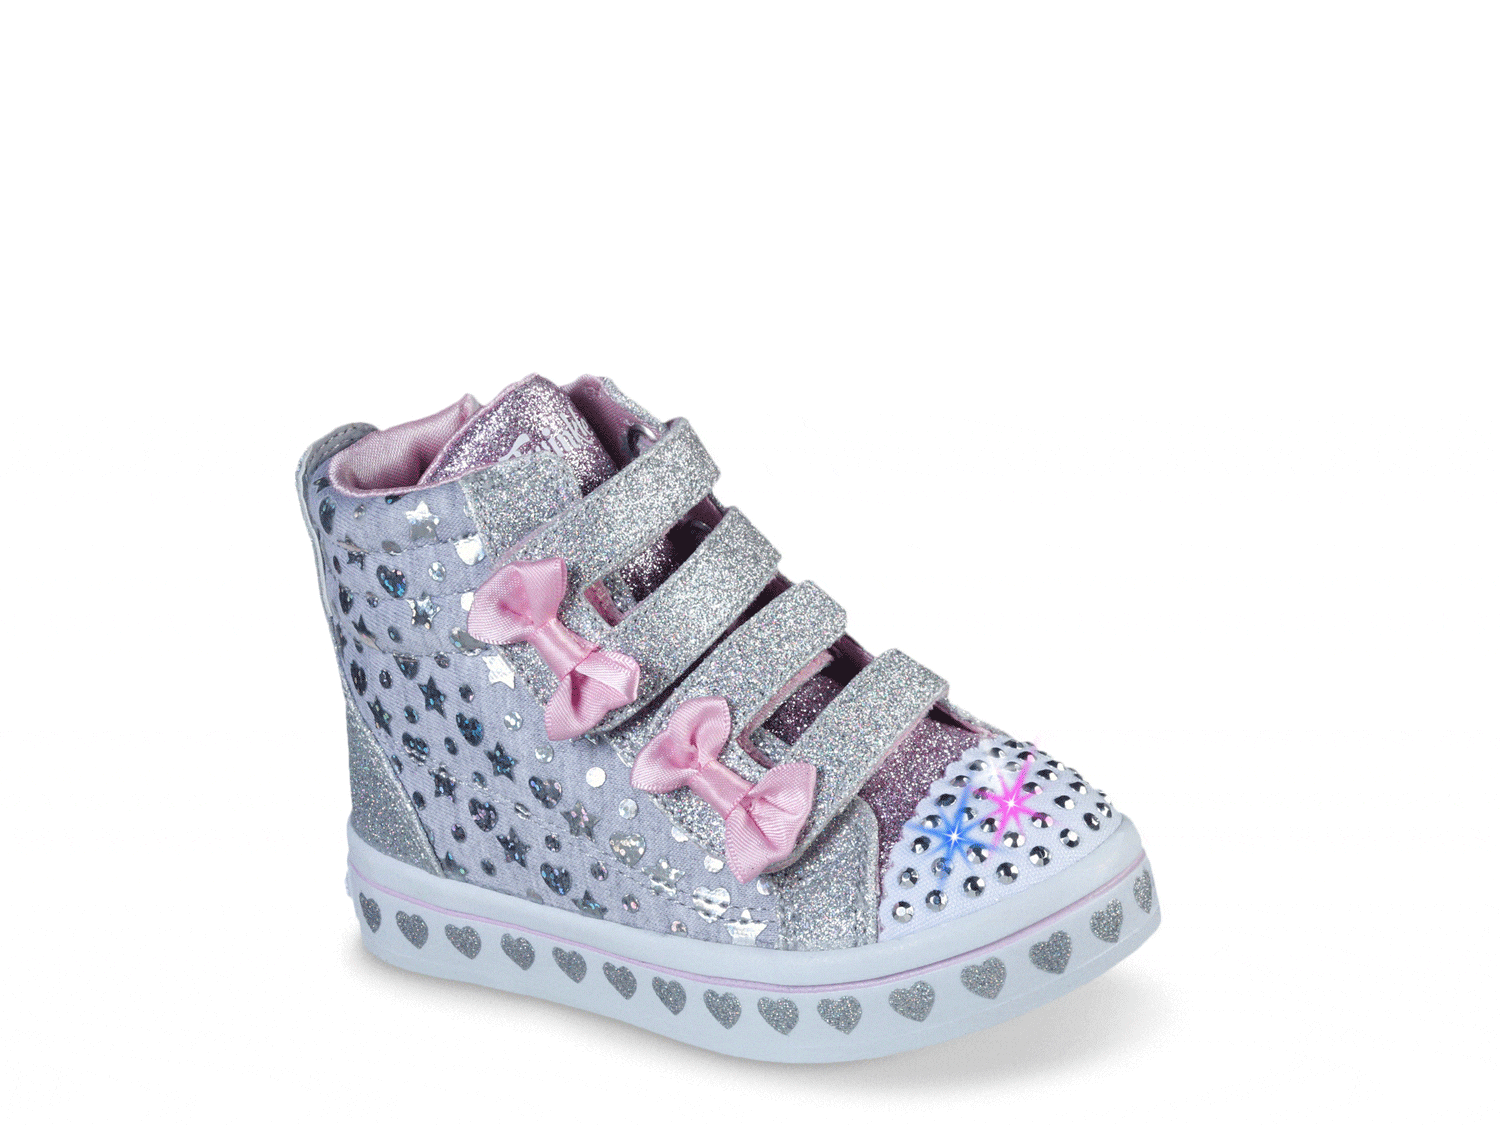 twinkle toes size 12